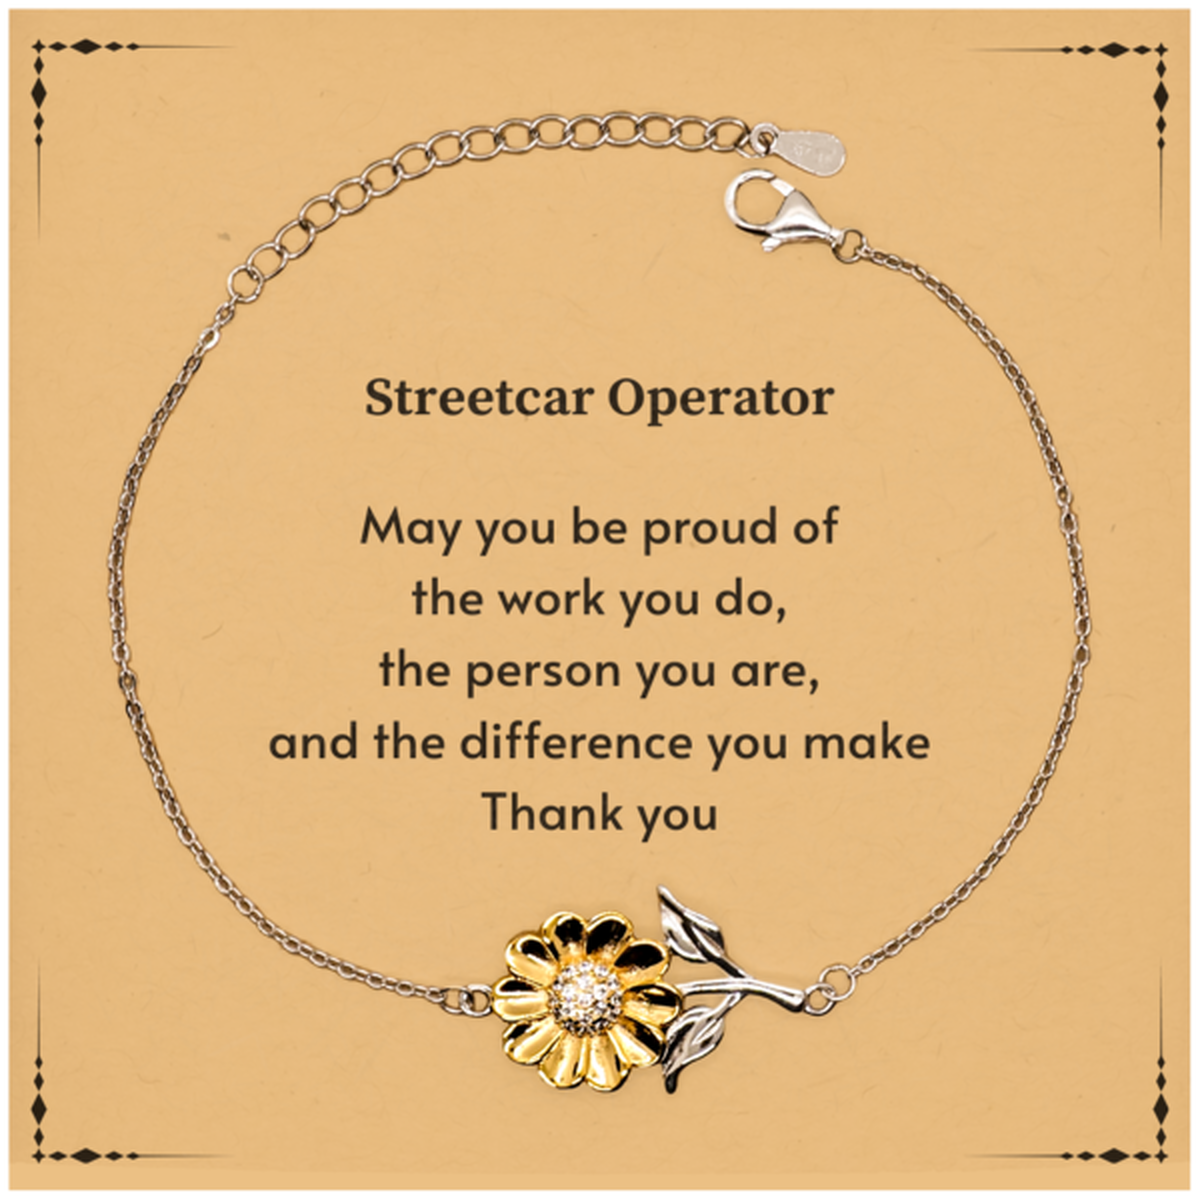 Heartwarming Sunflower Bracelet Retirement Coworkers Gifts for Streetcar Operator, Streetcar Operator May You be proud of the work you do, the person you are Gifts for Boss Men Women Friends